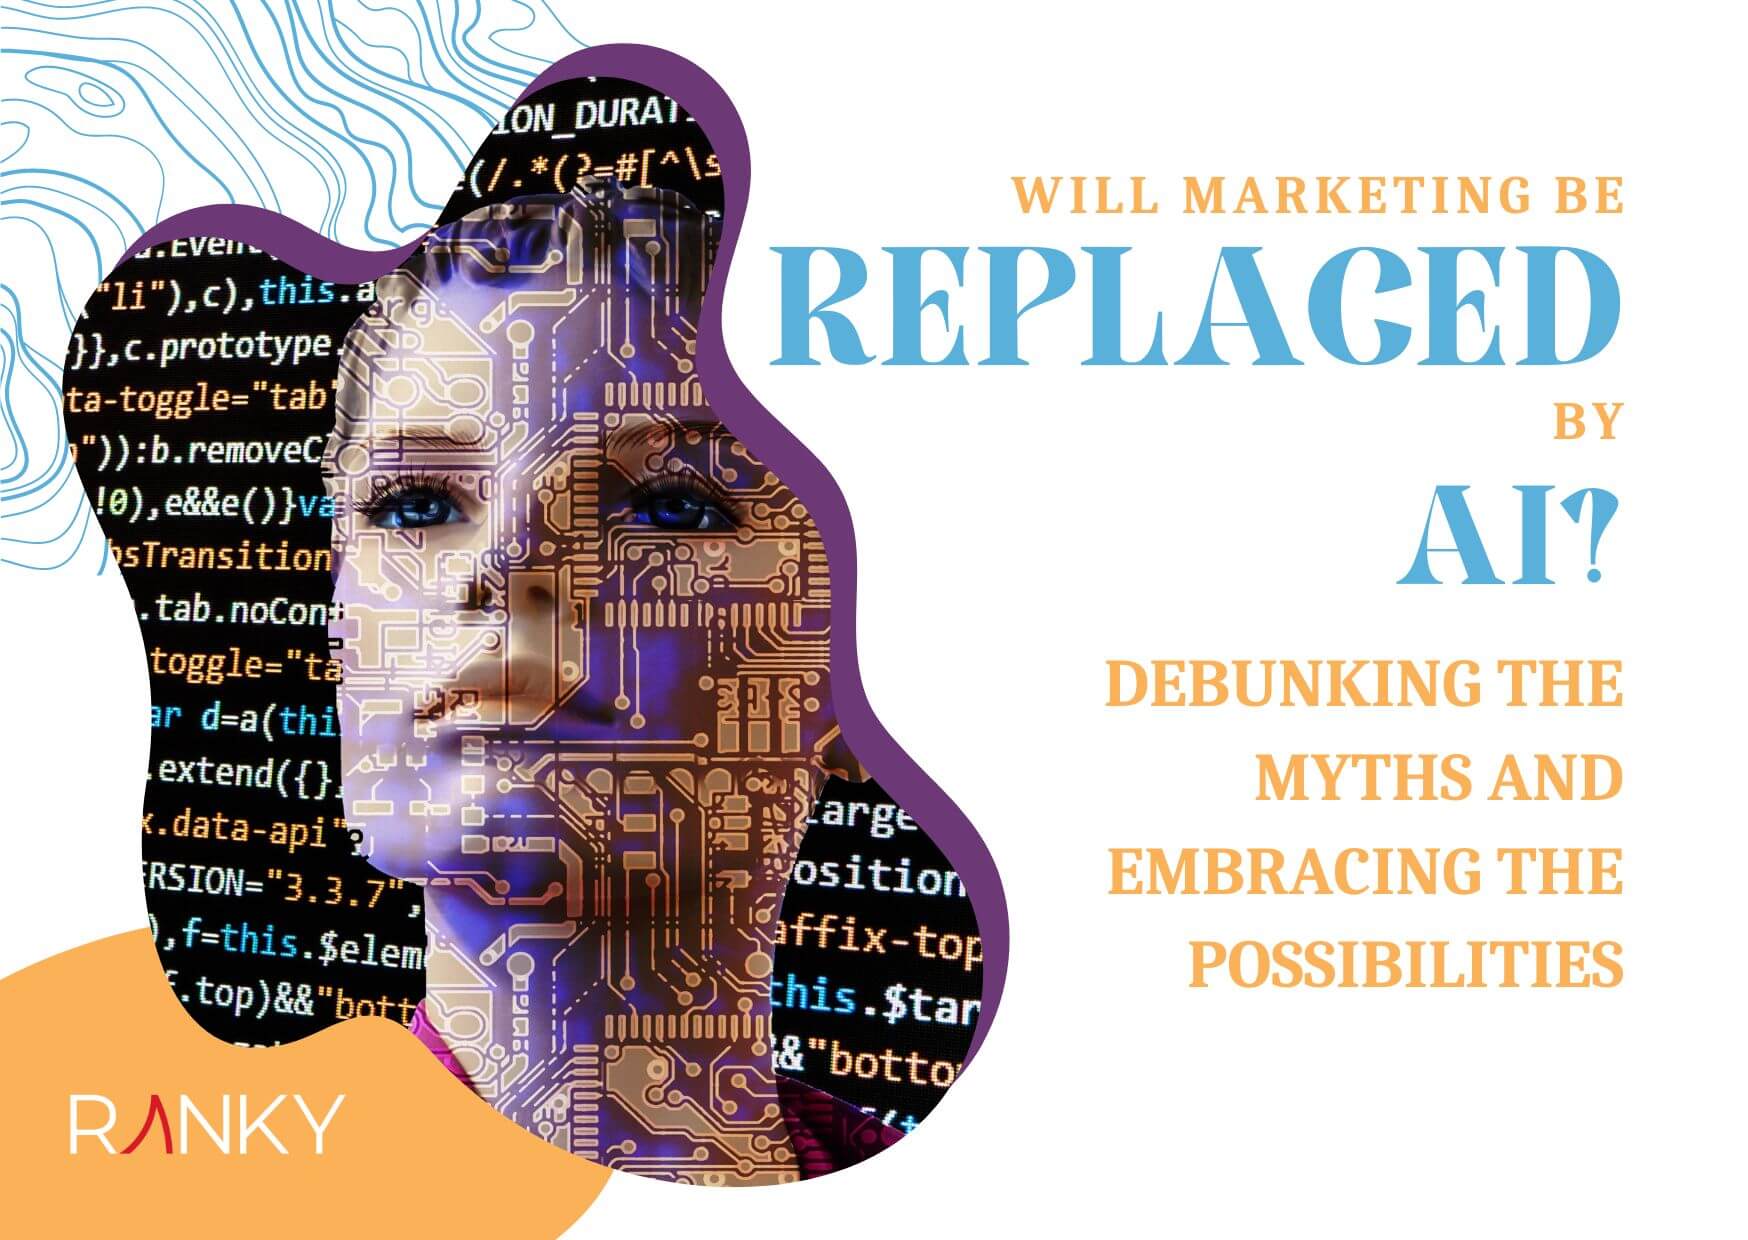 Will Marketing Be Replaced By AI? Debunking the Myths